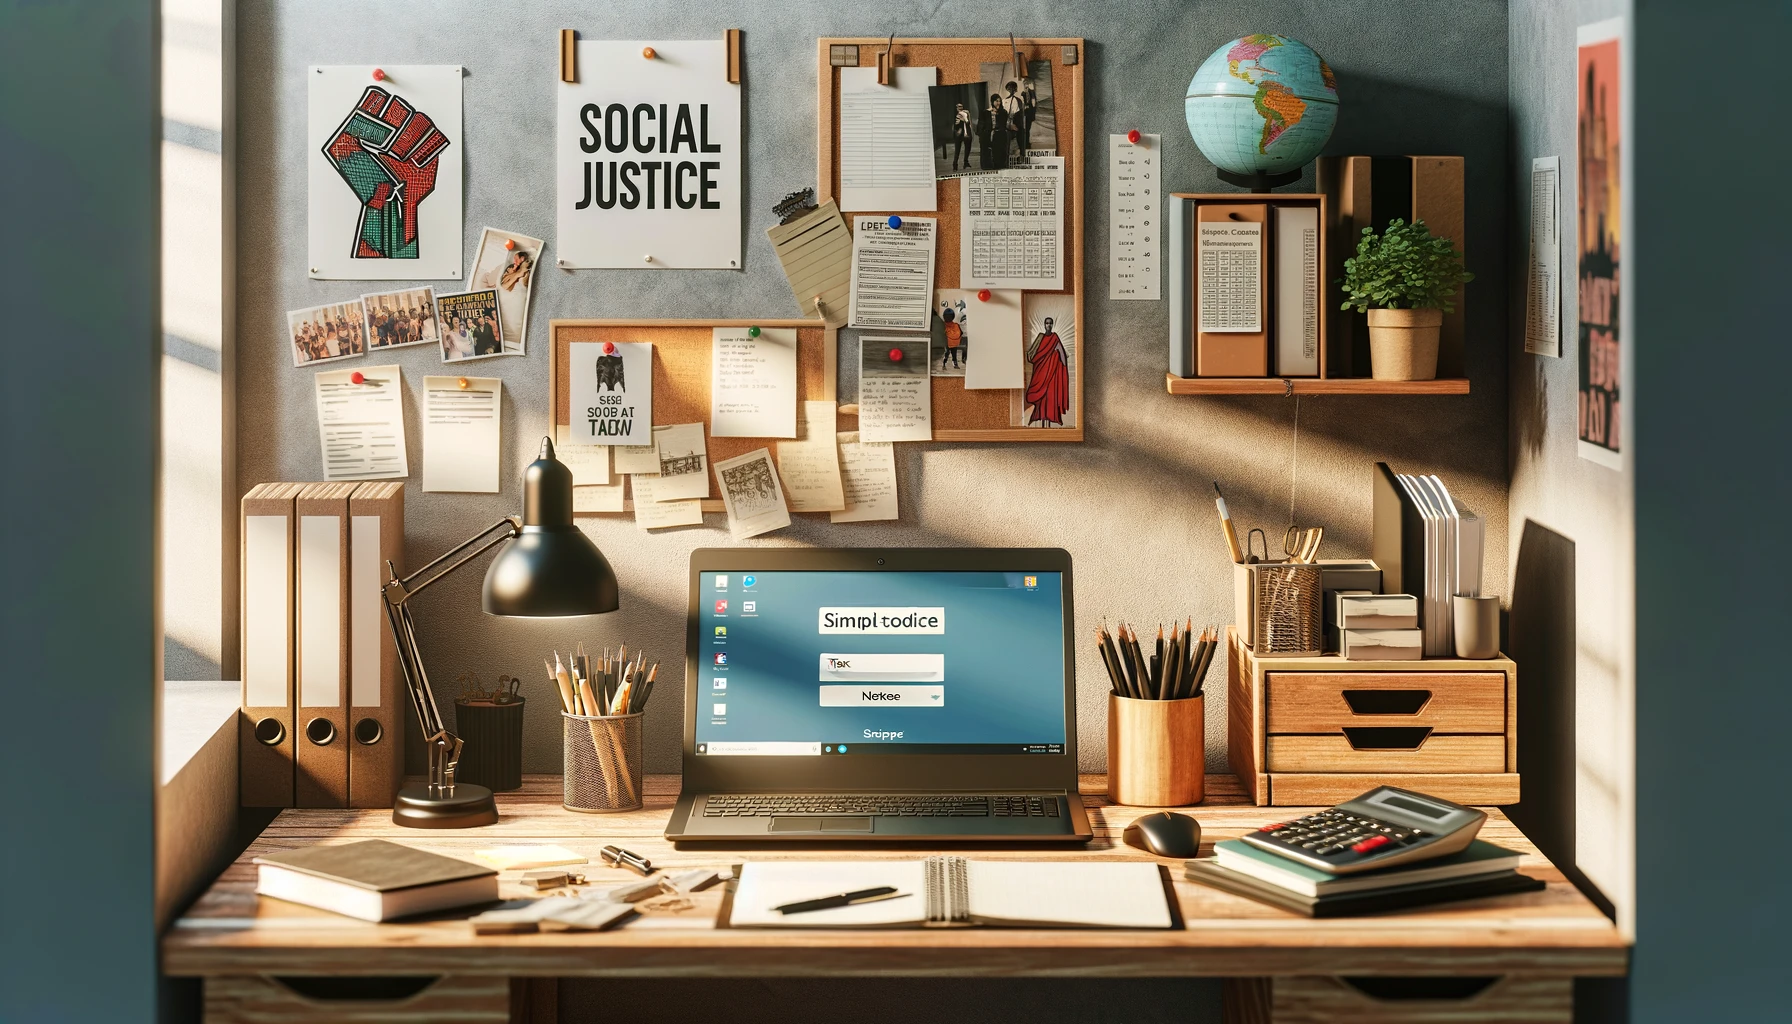 A small office space with a desk. On the desk there is a computer, calculator, pencils, a light and some files. On the wall there is a social justice and Black Lives Matter poster.